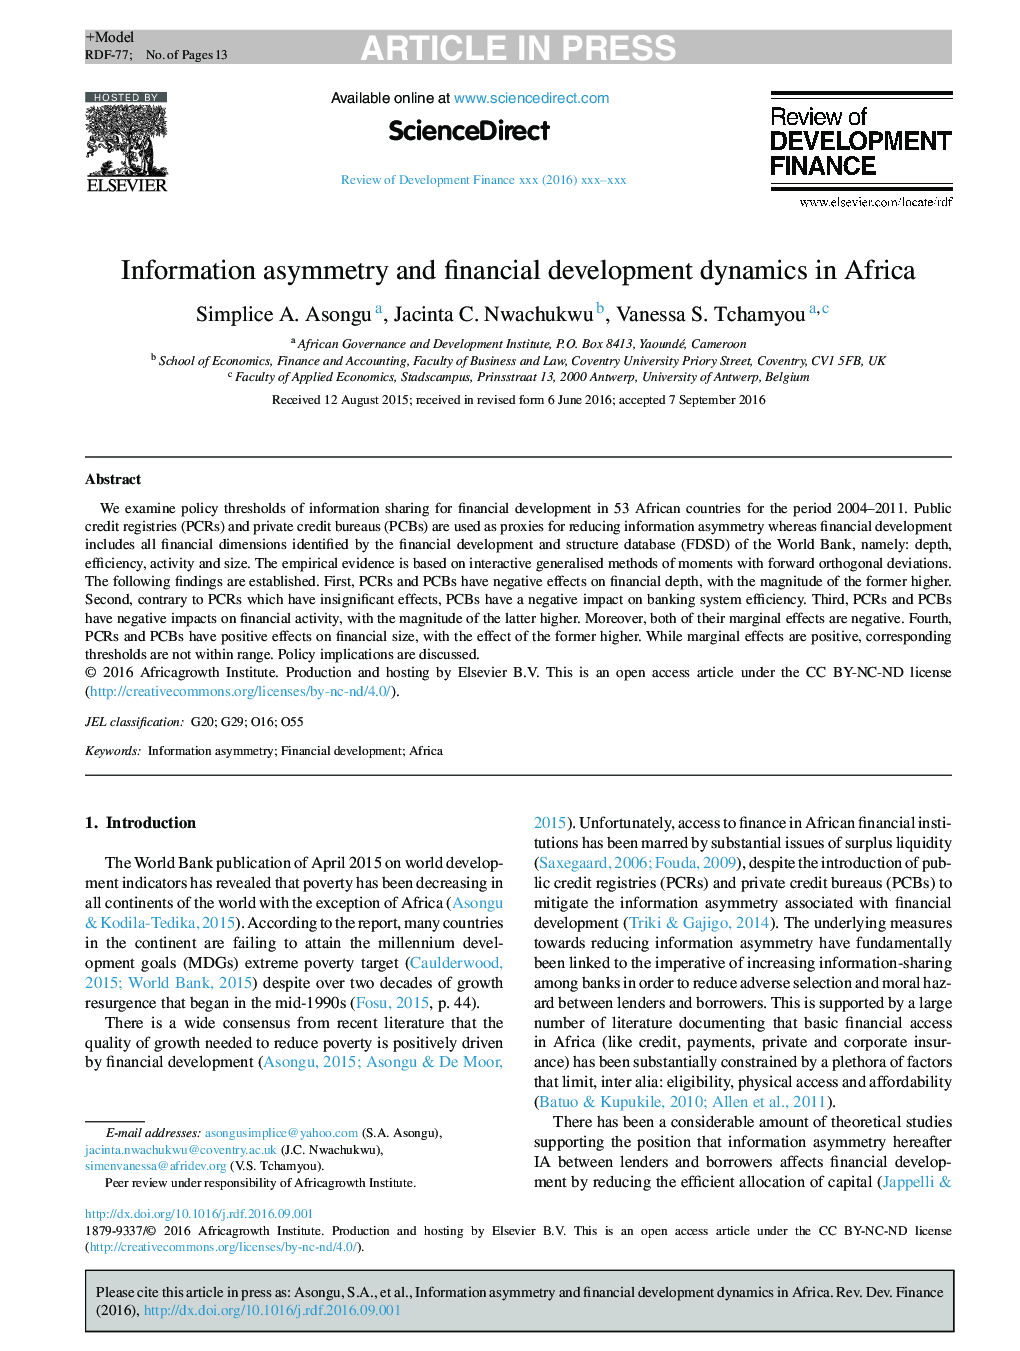 Information asymmetry and financial development dynamics in Africa